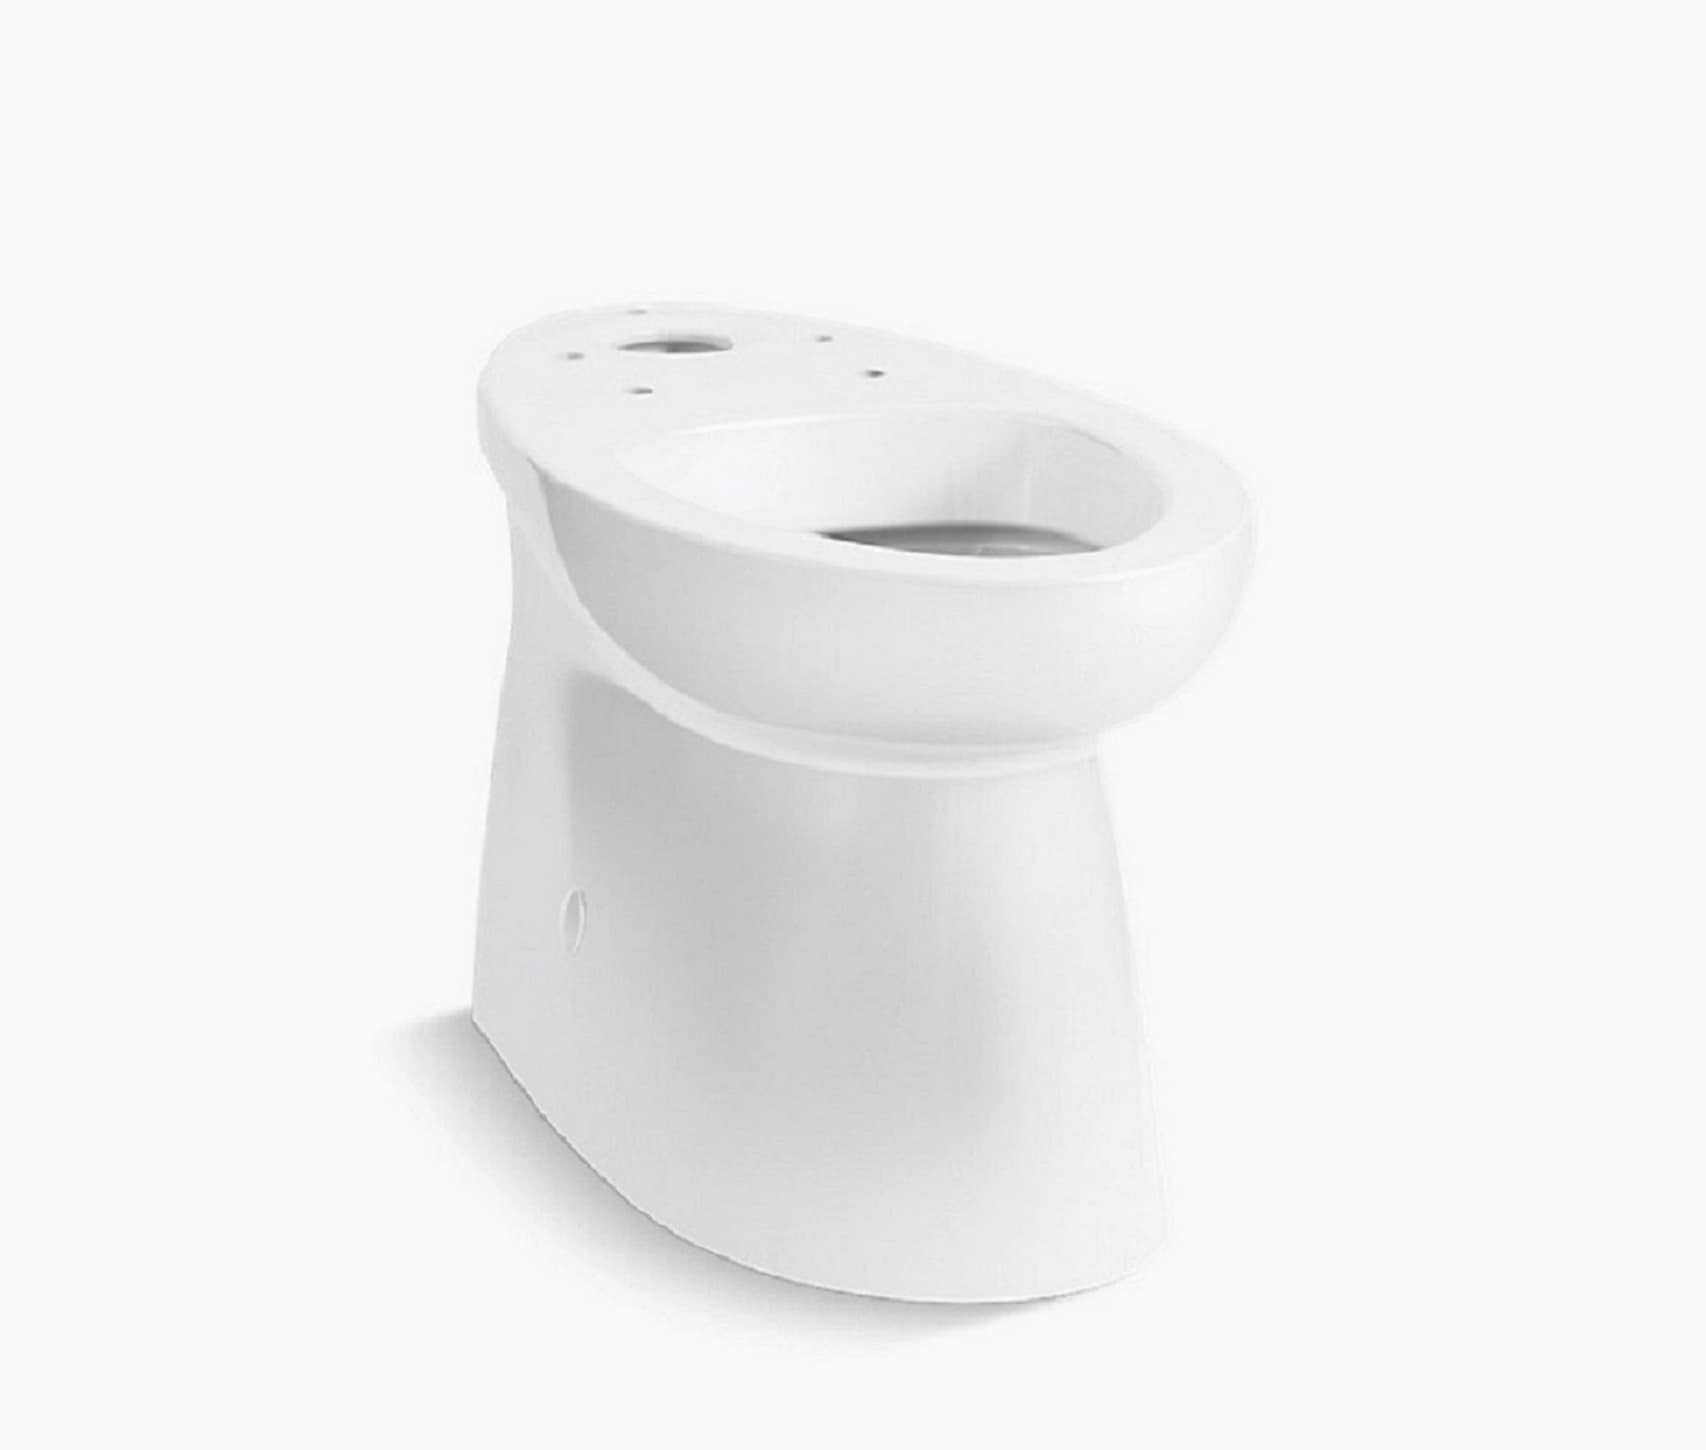 Brella Elongated Chair Height Toilet Bowl in White | - Sterling 402101-0